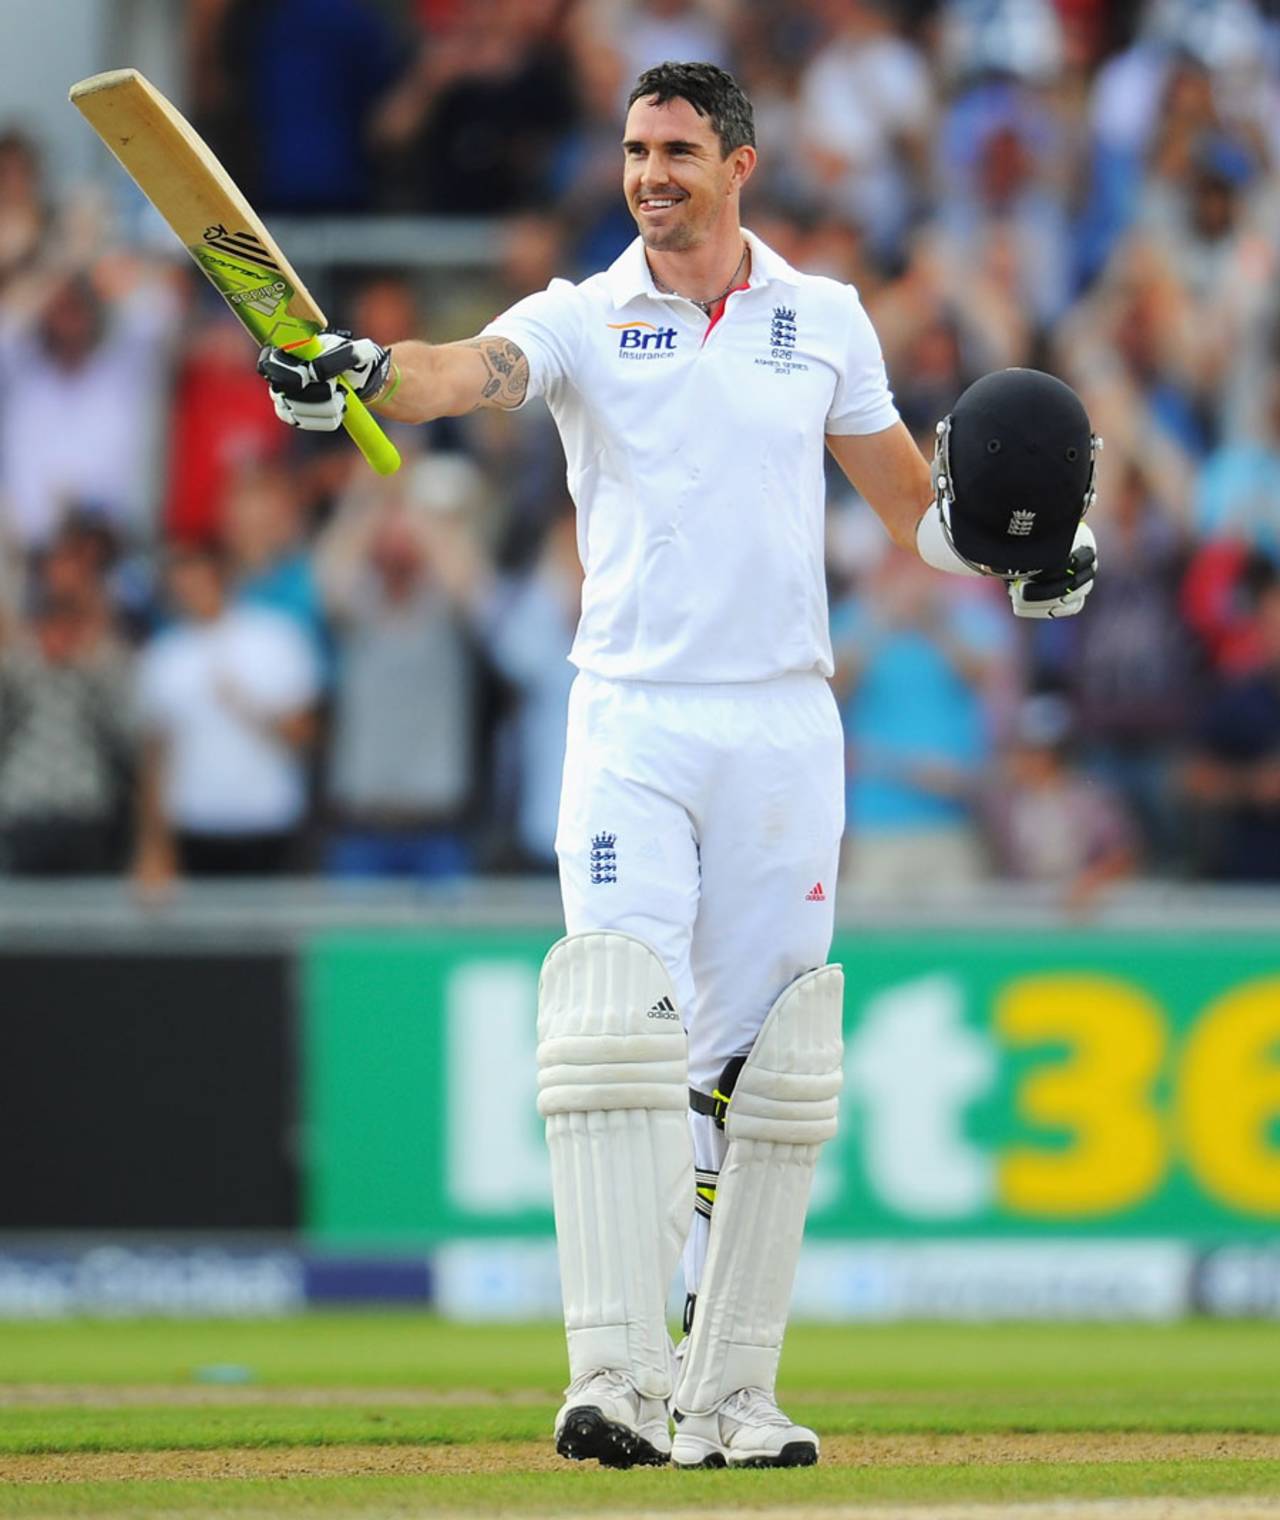 Kevin Pietersen scored his 23rd Test century, England v Australia, 3rd Investec Test, Old Trafford, 3rd day, August 3, 2013